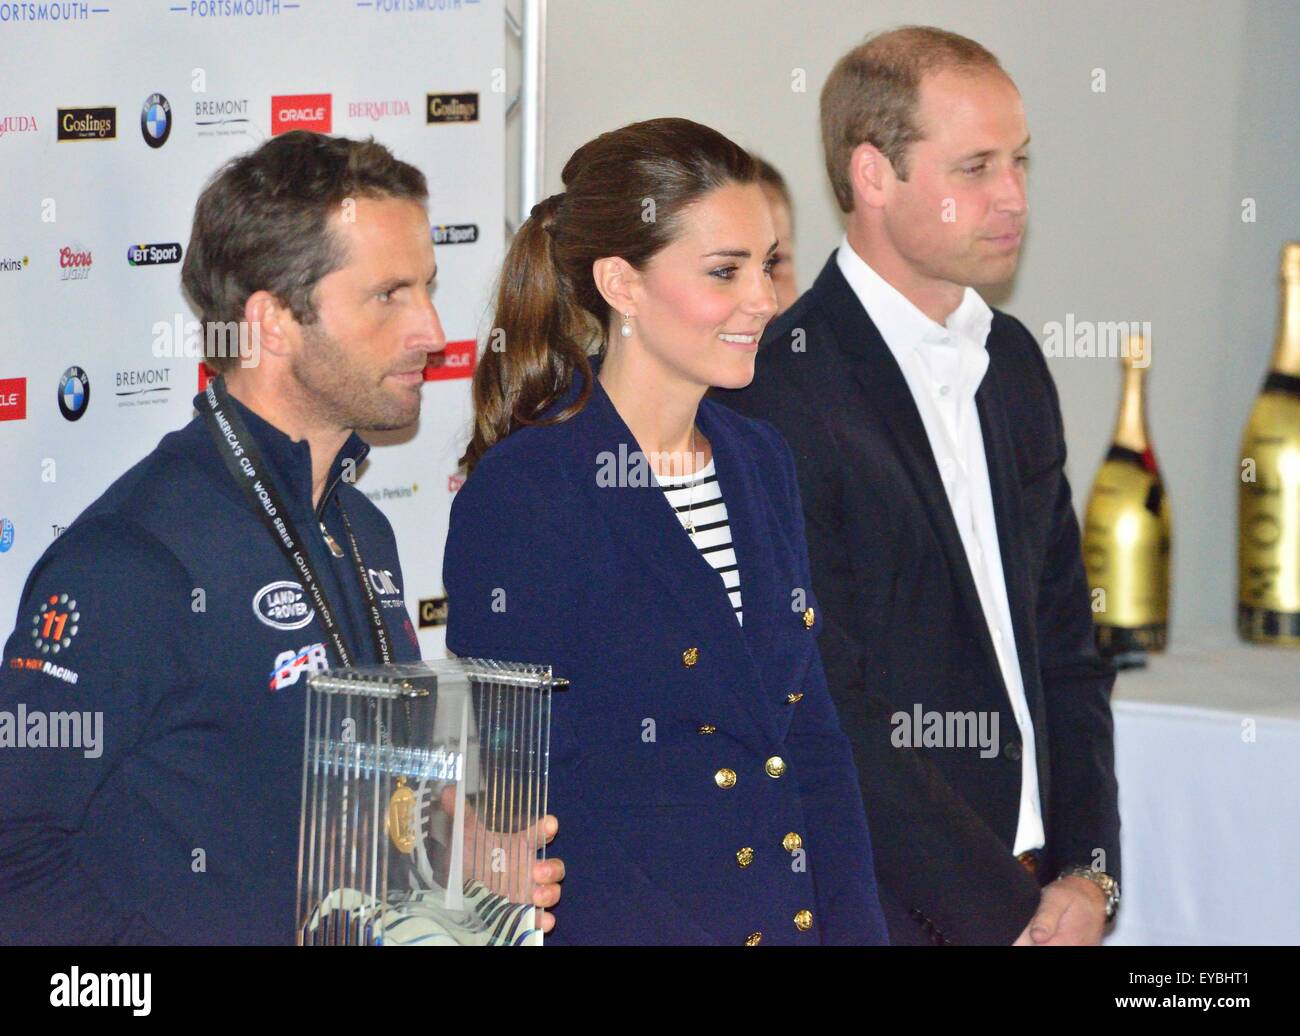 Portsmouth, Hampshire, UK. 26th July, 2015. The Duke and Duchess of Cambridge present Sir Ben Ainslie, skipper of the British 'Land Rover BAR' team with the cup for winning the Louis Vuitton America's Cup World Series Portsmouth at the official prize giving.  The cup was designed by 5 year old Leo Howard from a local school on behalf of the 1851 Trust and made by artist Michelle Littlewood.Self billing. Credit:  Wendy Johnson/Alamy Live News (photographer media accredited for this event) Stock Photo